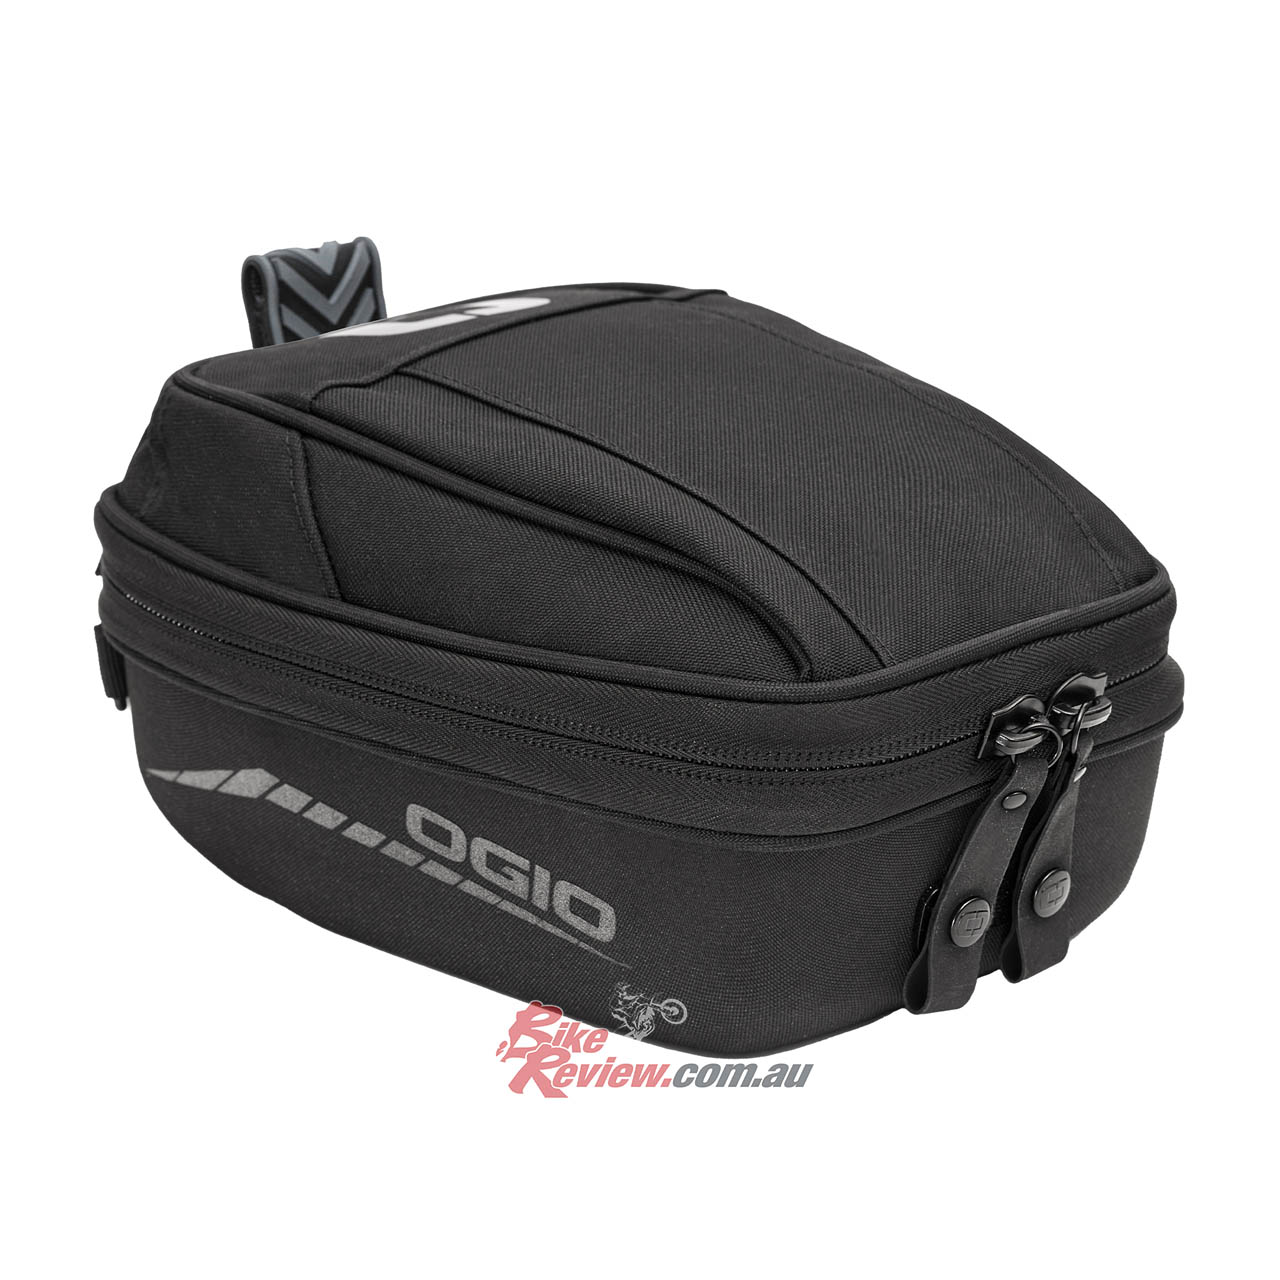 The S1 is a fixed 4L tank bag with a 600D Polyester top and features a bottom made of a single shot molded PU with 600D Polyester cover.